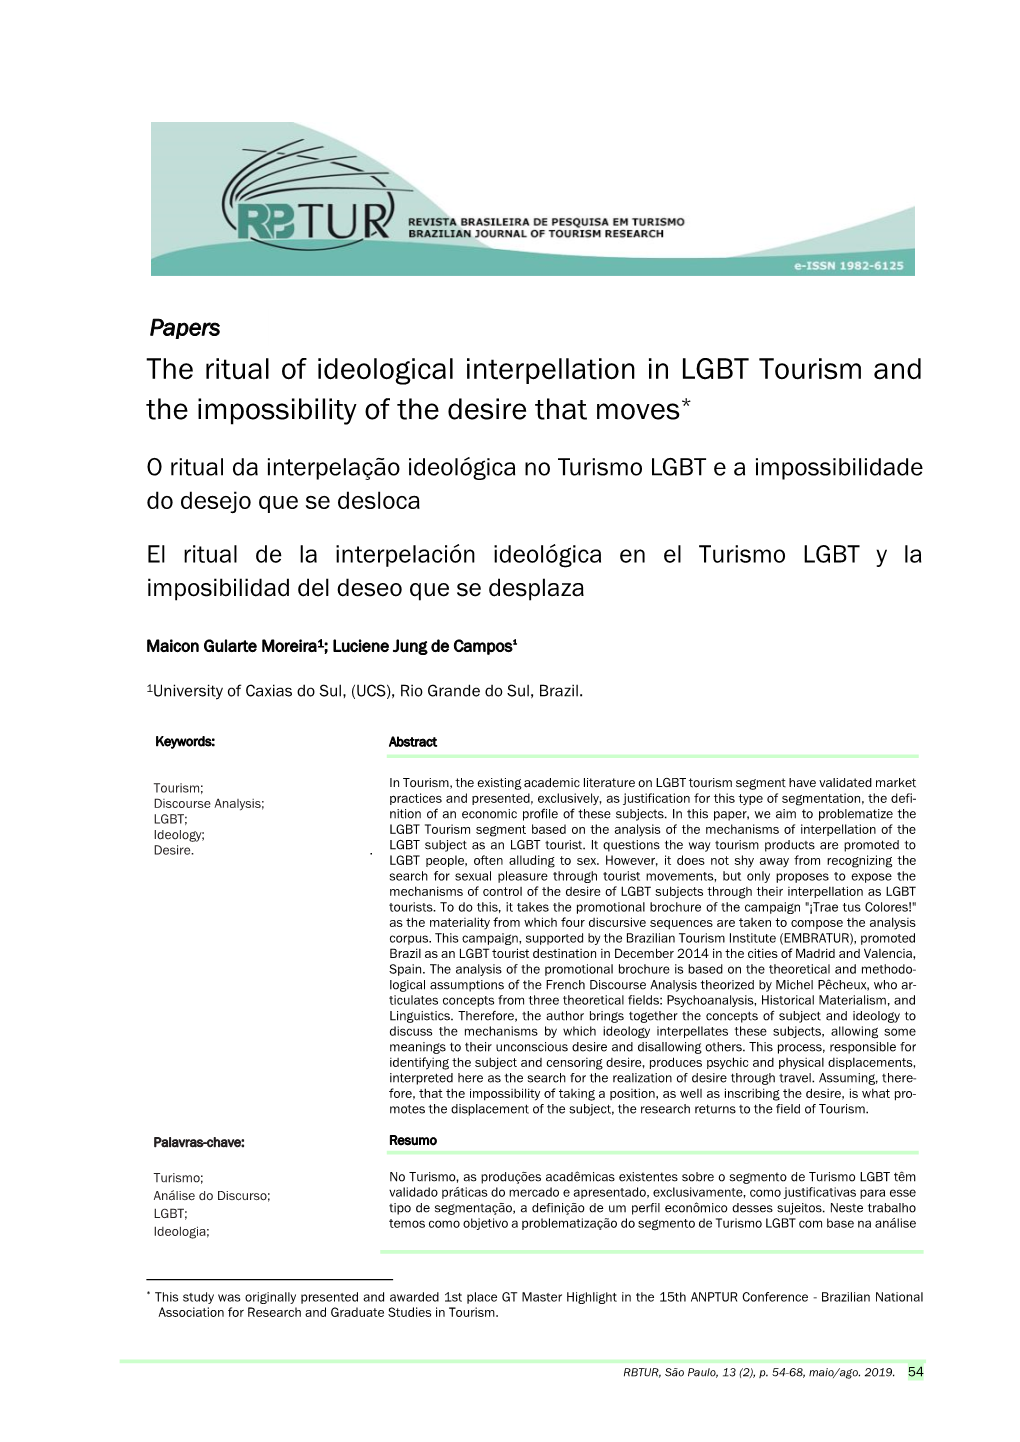 The Ritual of Ideological Interpellation in LGBT Tourism and the Impossibility of the Desire That Moves*